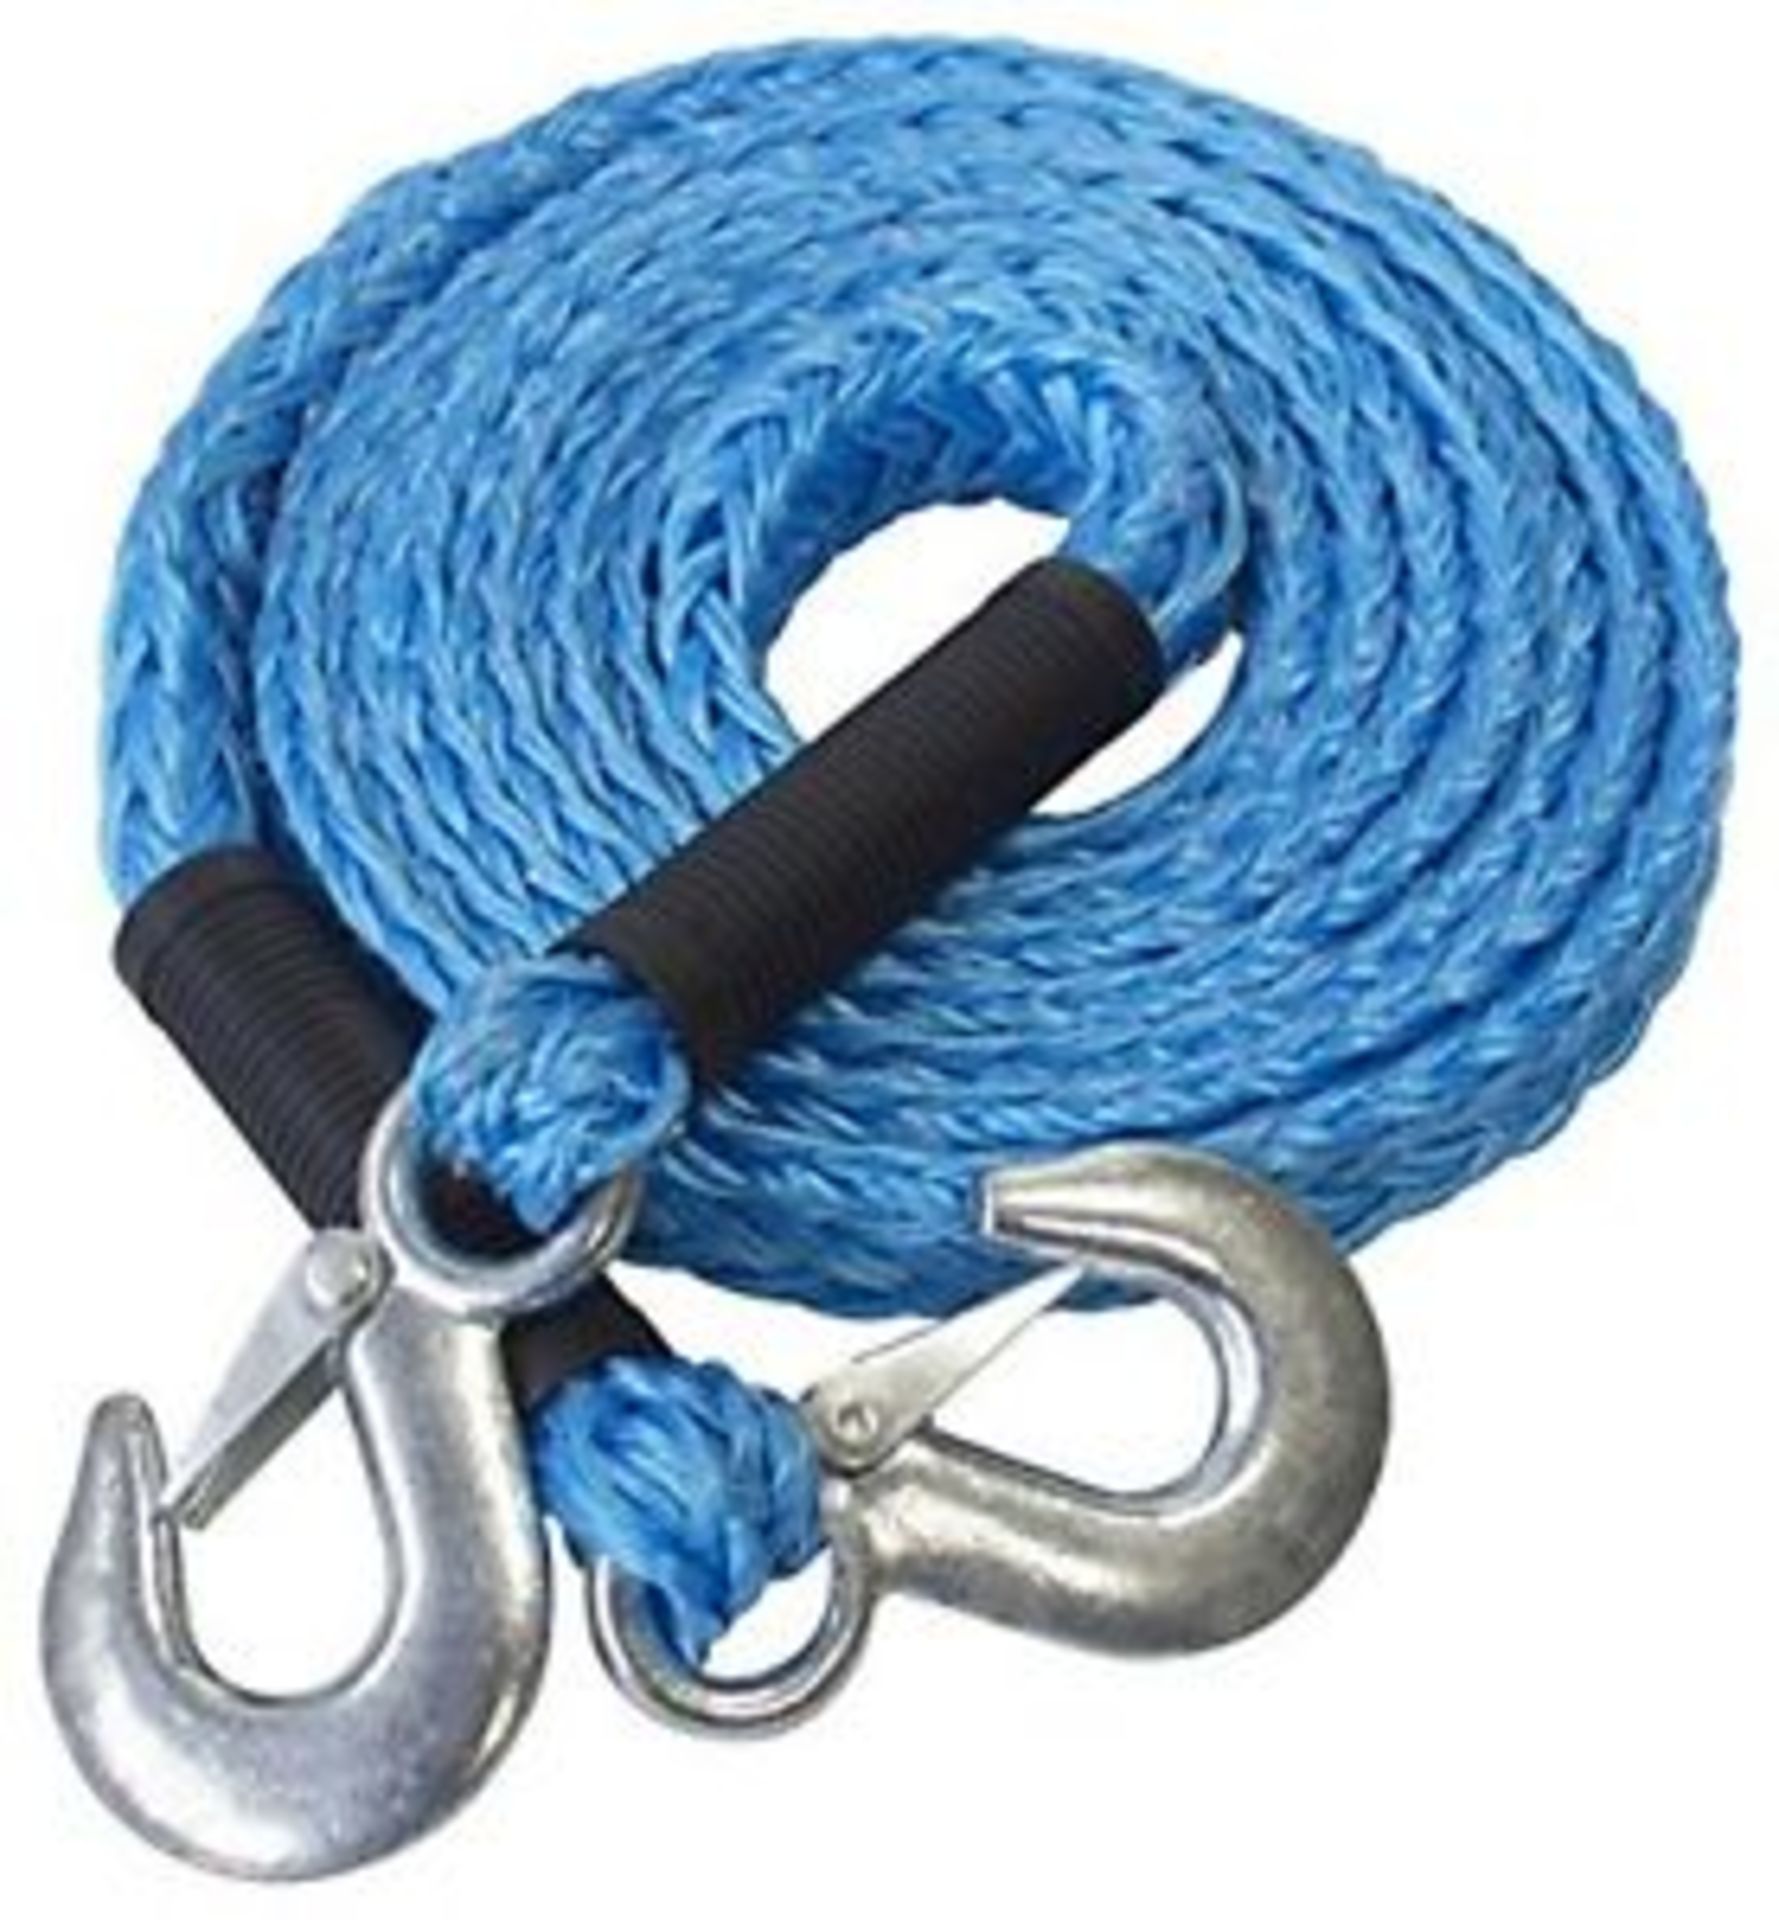 V *TRADE QTY* Brand New Four Metre Tow Rope With Shackle Hooks - Extremely Strong Polypropylene Rope